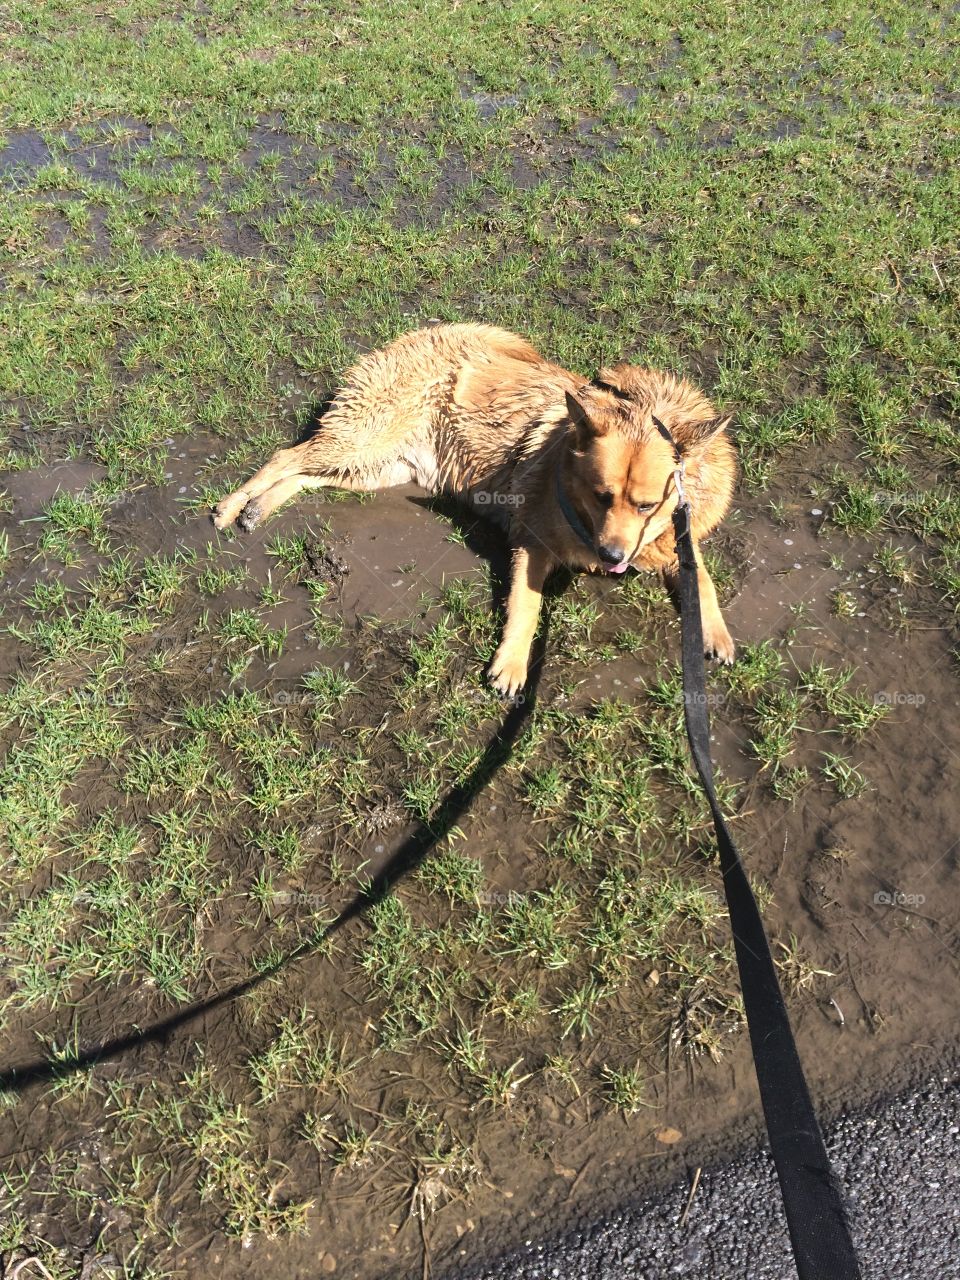 When you're a dog & you just don't care if you get wet & muddy